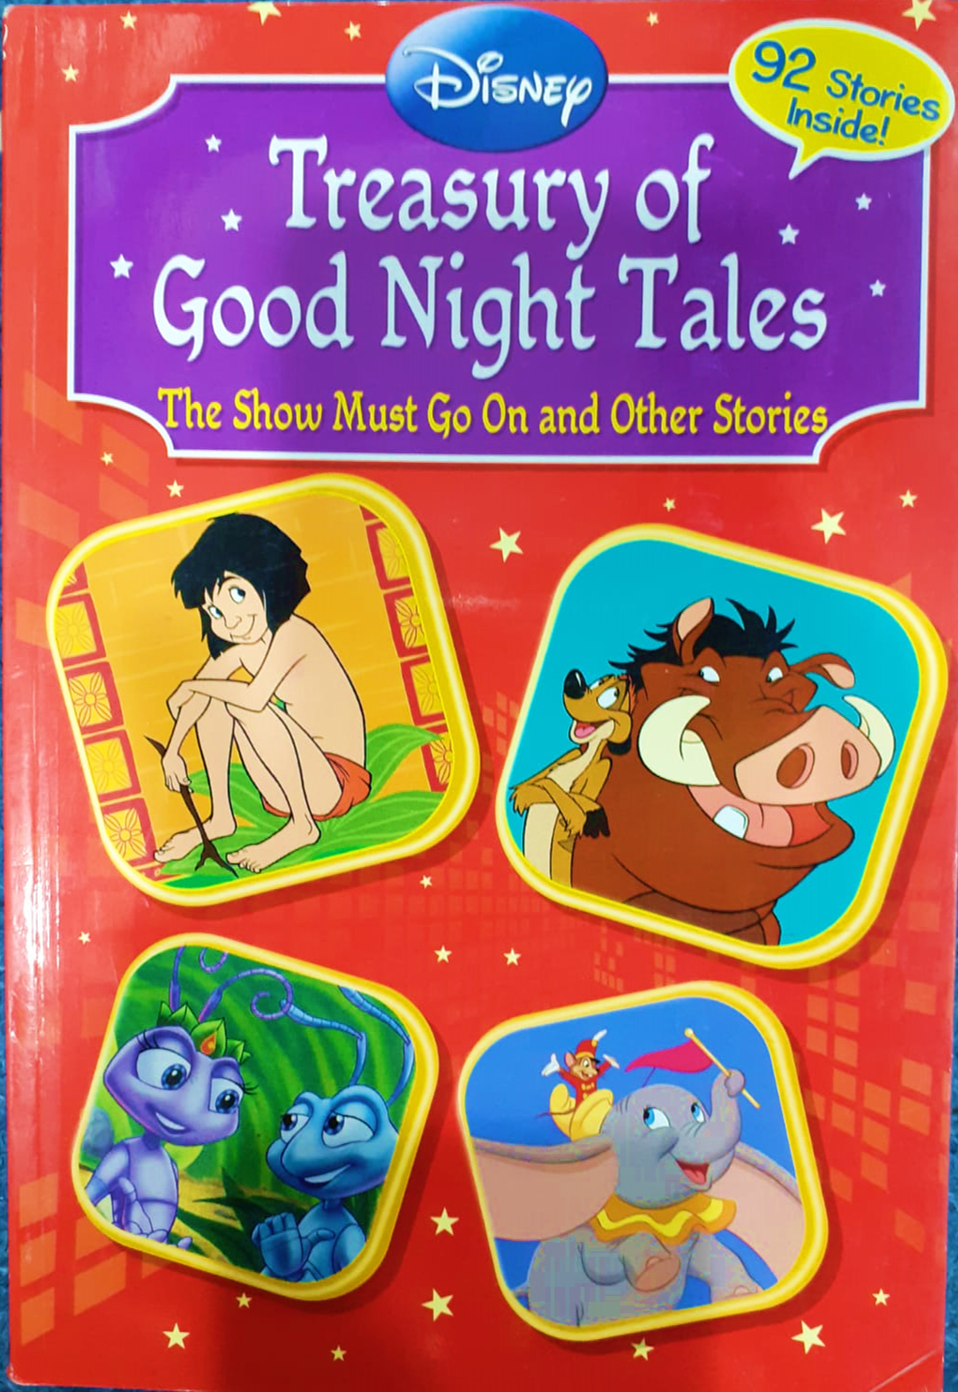 DISNEY - TREASURY OF GOOD NIGHT TALES - THE SHOW MUST GO ON AND OTHER STORIES